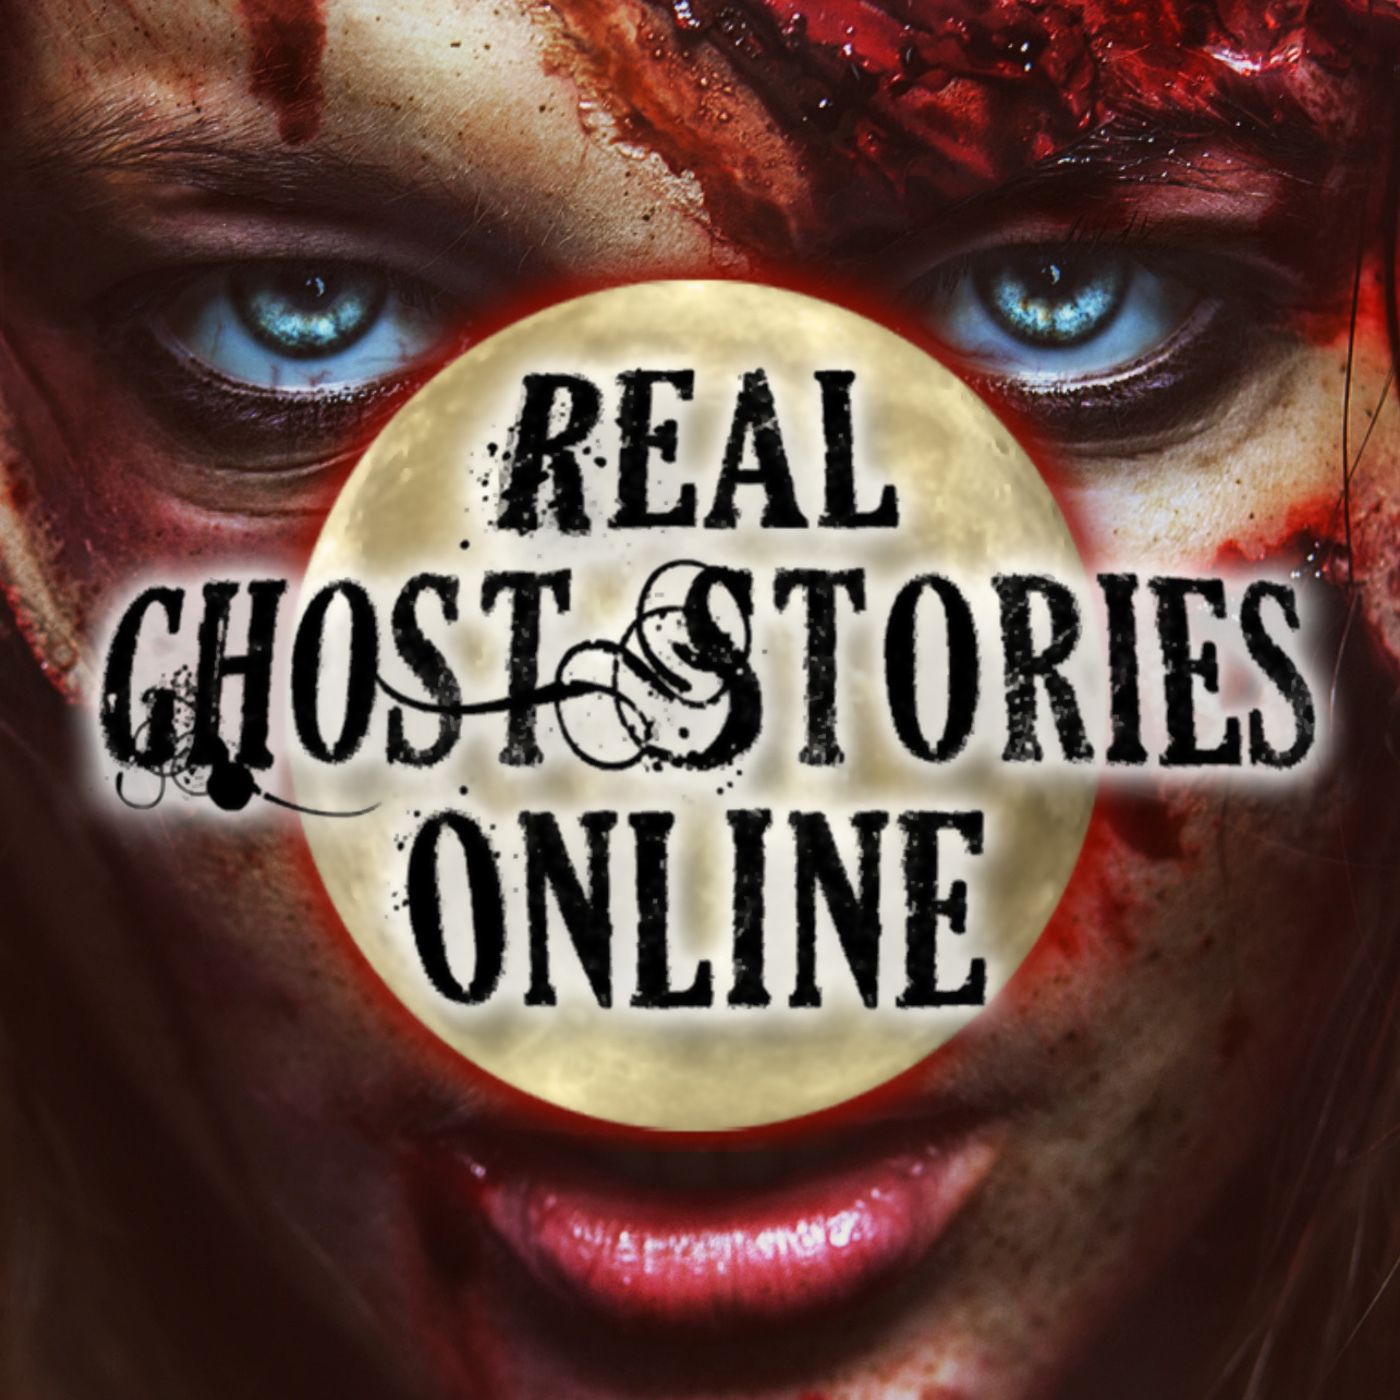 What Happened to the Photo? | Real Ghost Stories Online